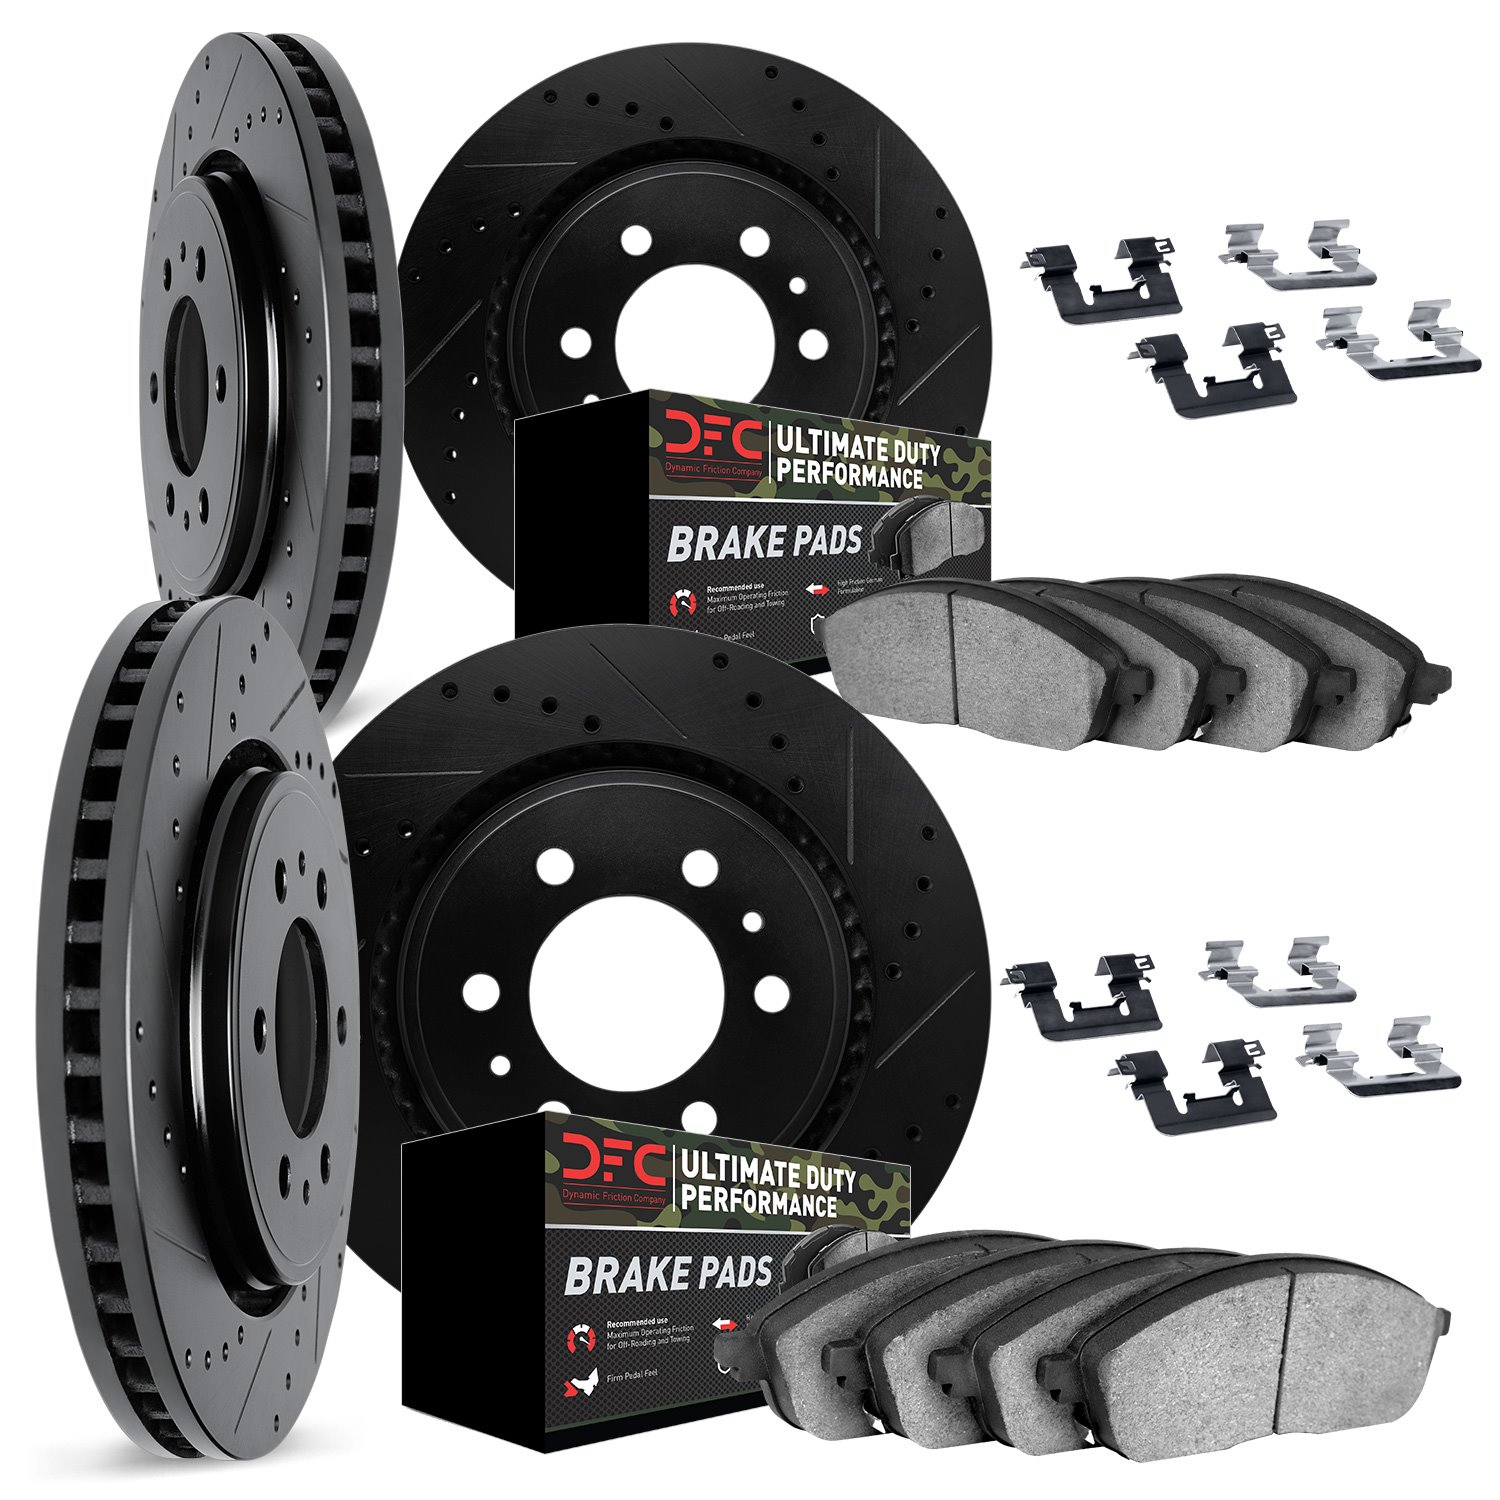 8414-76008 Drilled/Slotted Brake Rotors with Ultimate-Duty Brake Pads Kit & Hardware [Black], Fits Select Lexus/Toyota/Scion, Po